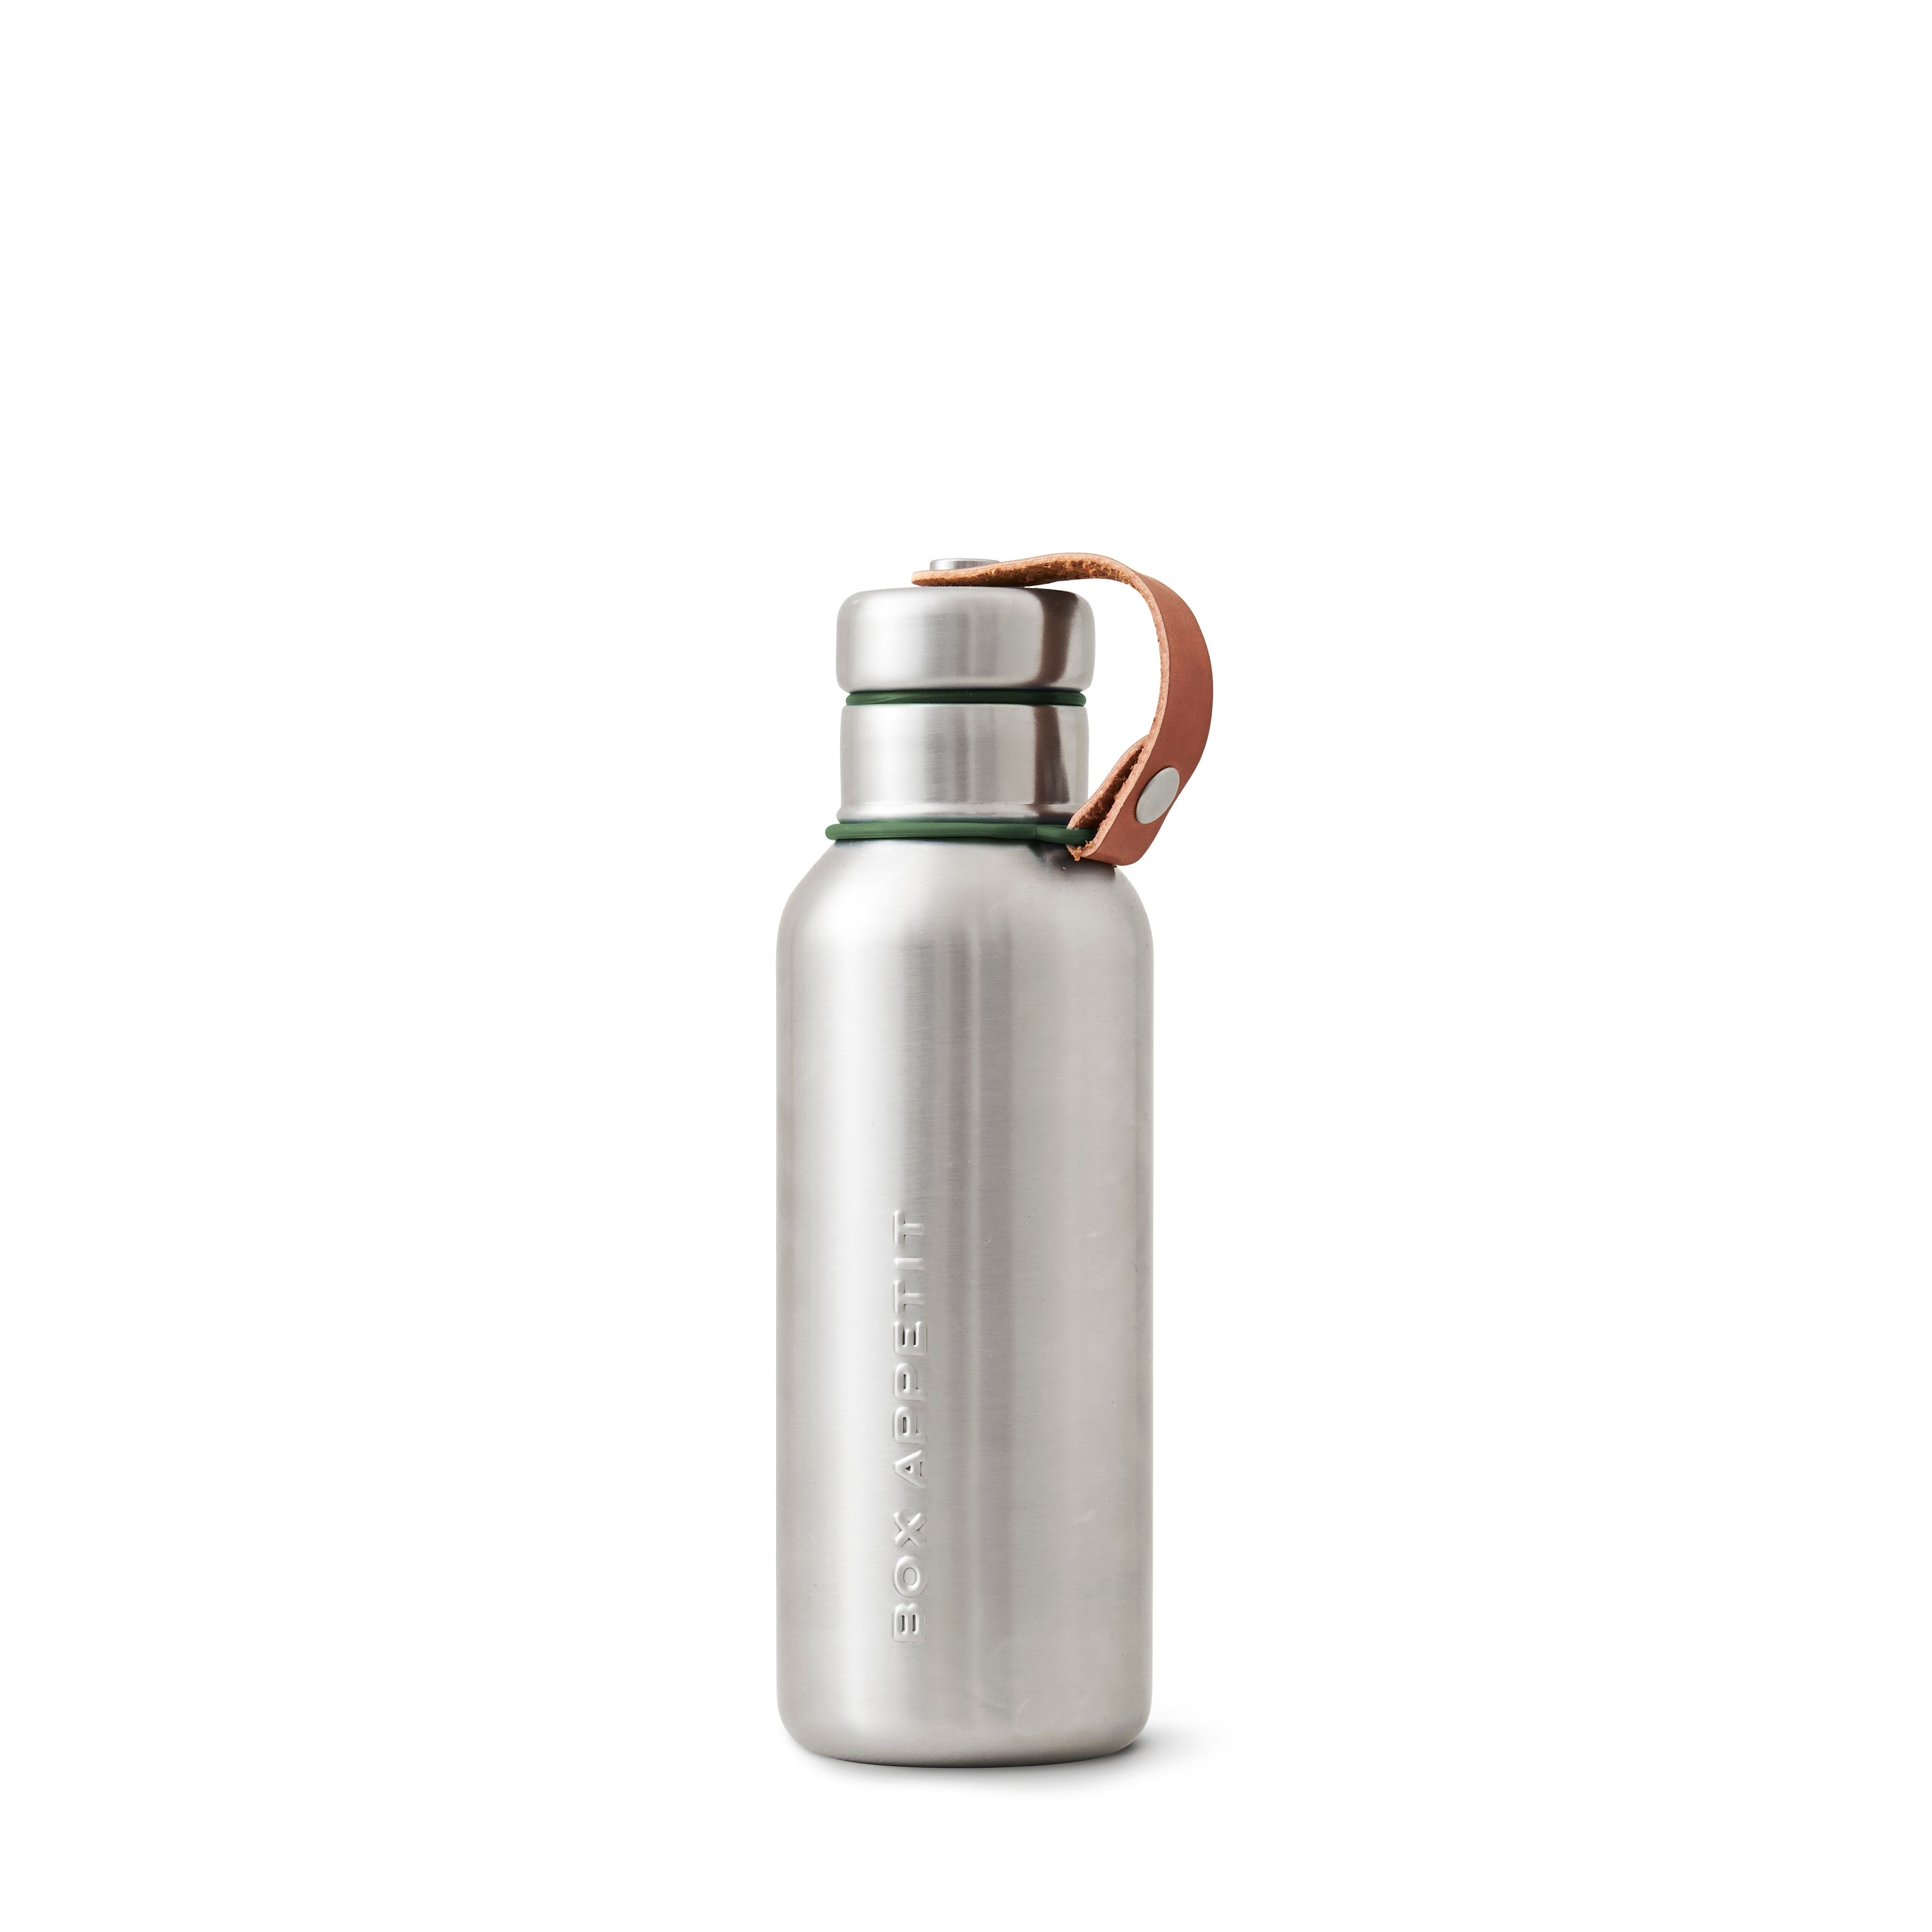 Wide Mouth Stainless Steel Water Bottle with Straw Lid, 17OZ / 500ML